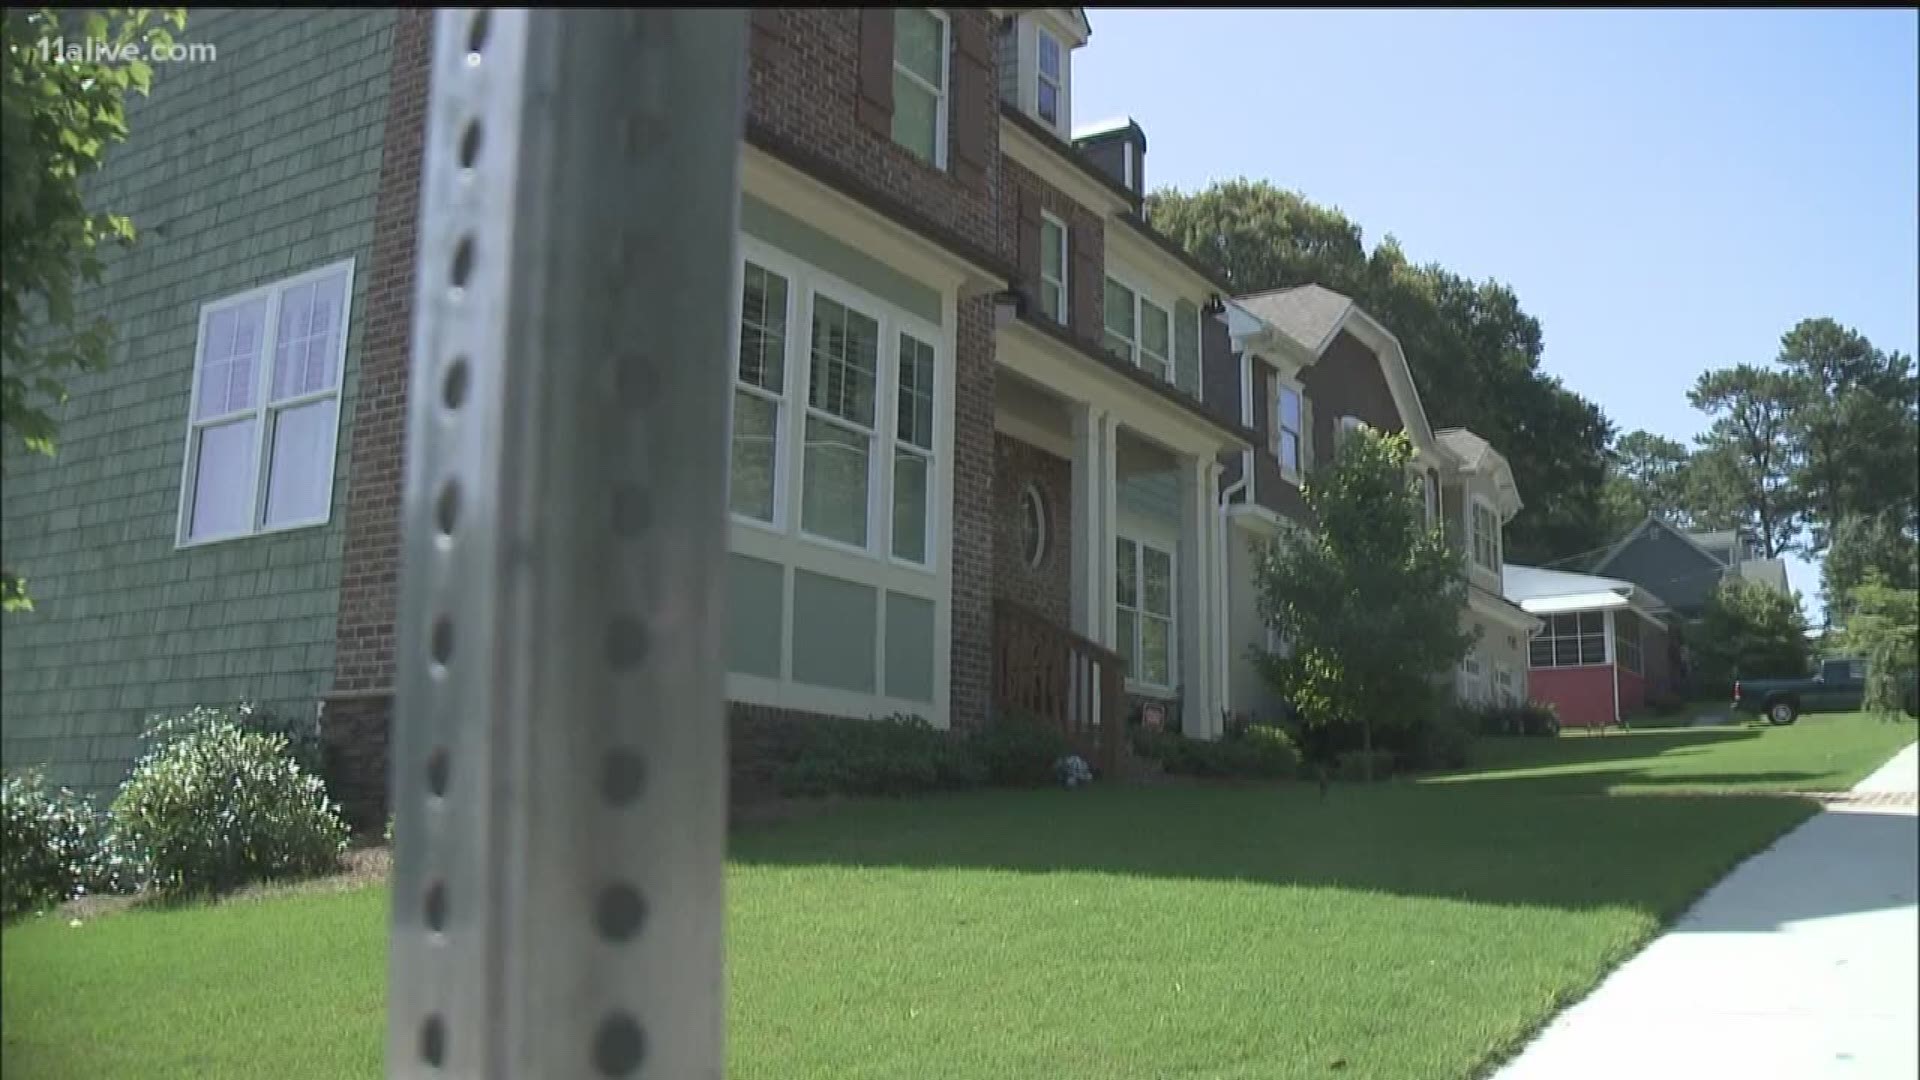 Many Fulton County homeowners will be hit with double-digit increases in their property assessments for a second year.